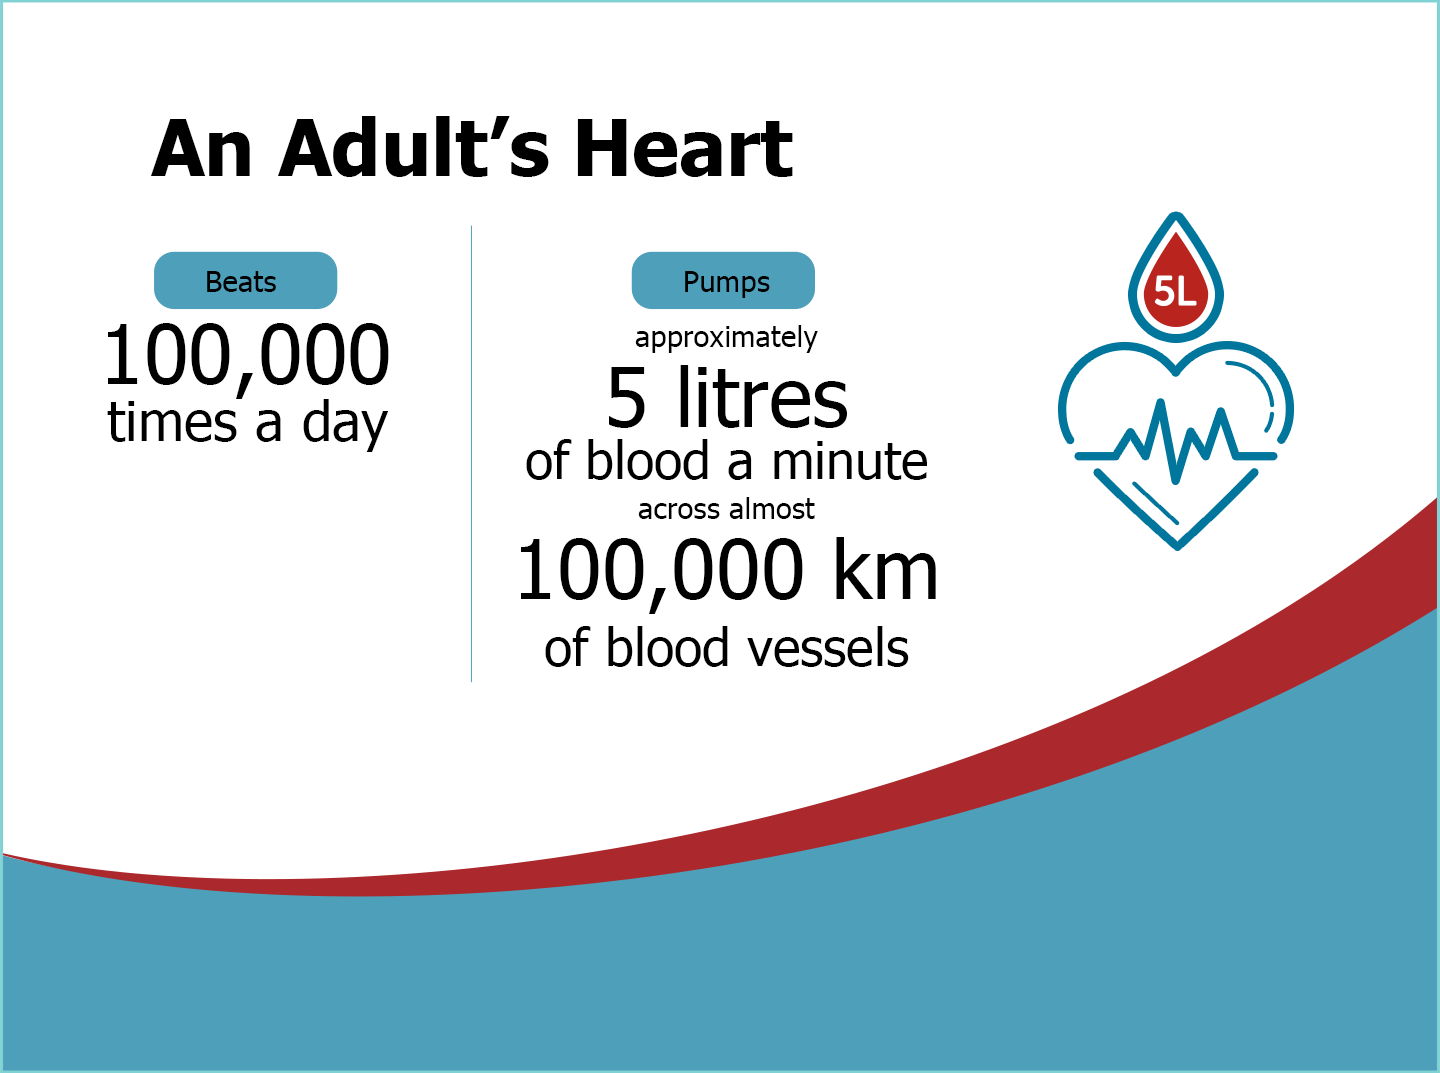 Adult heart beats 100,000 times/day, pumps 5L blood daily.